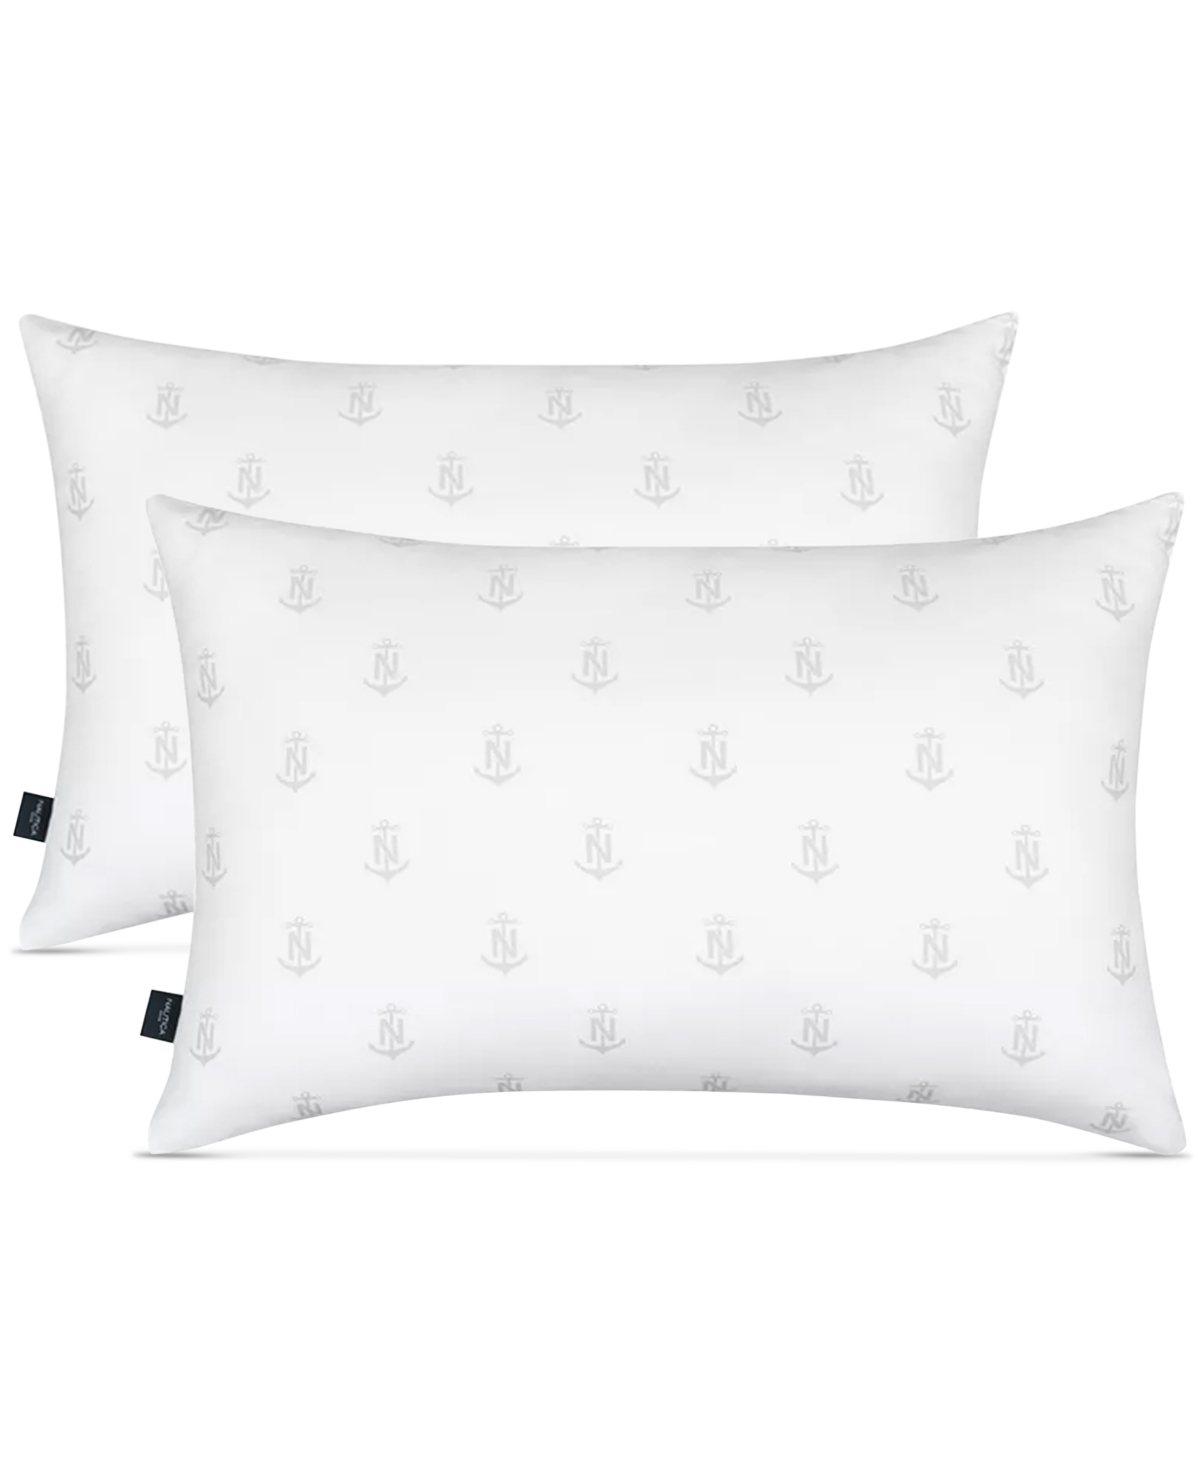 Nautica True Comfort All Position King Pillows, Set Of 2 In White